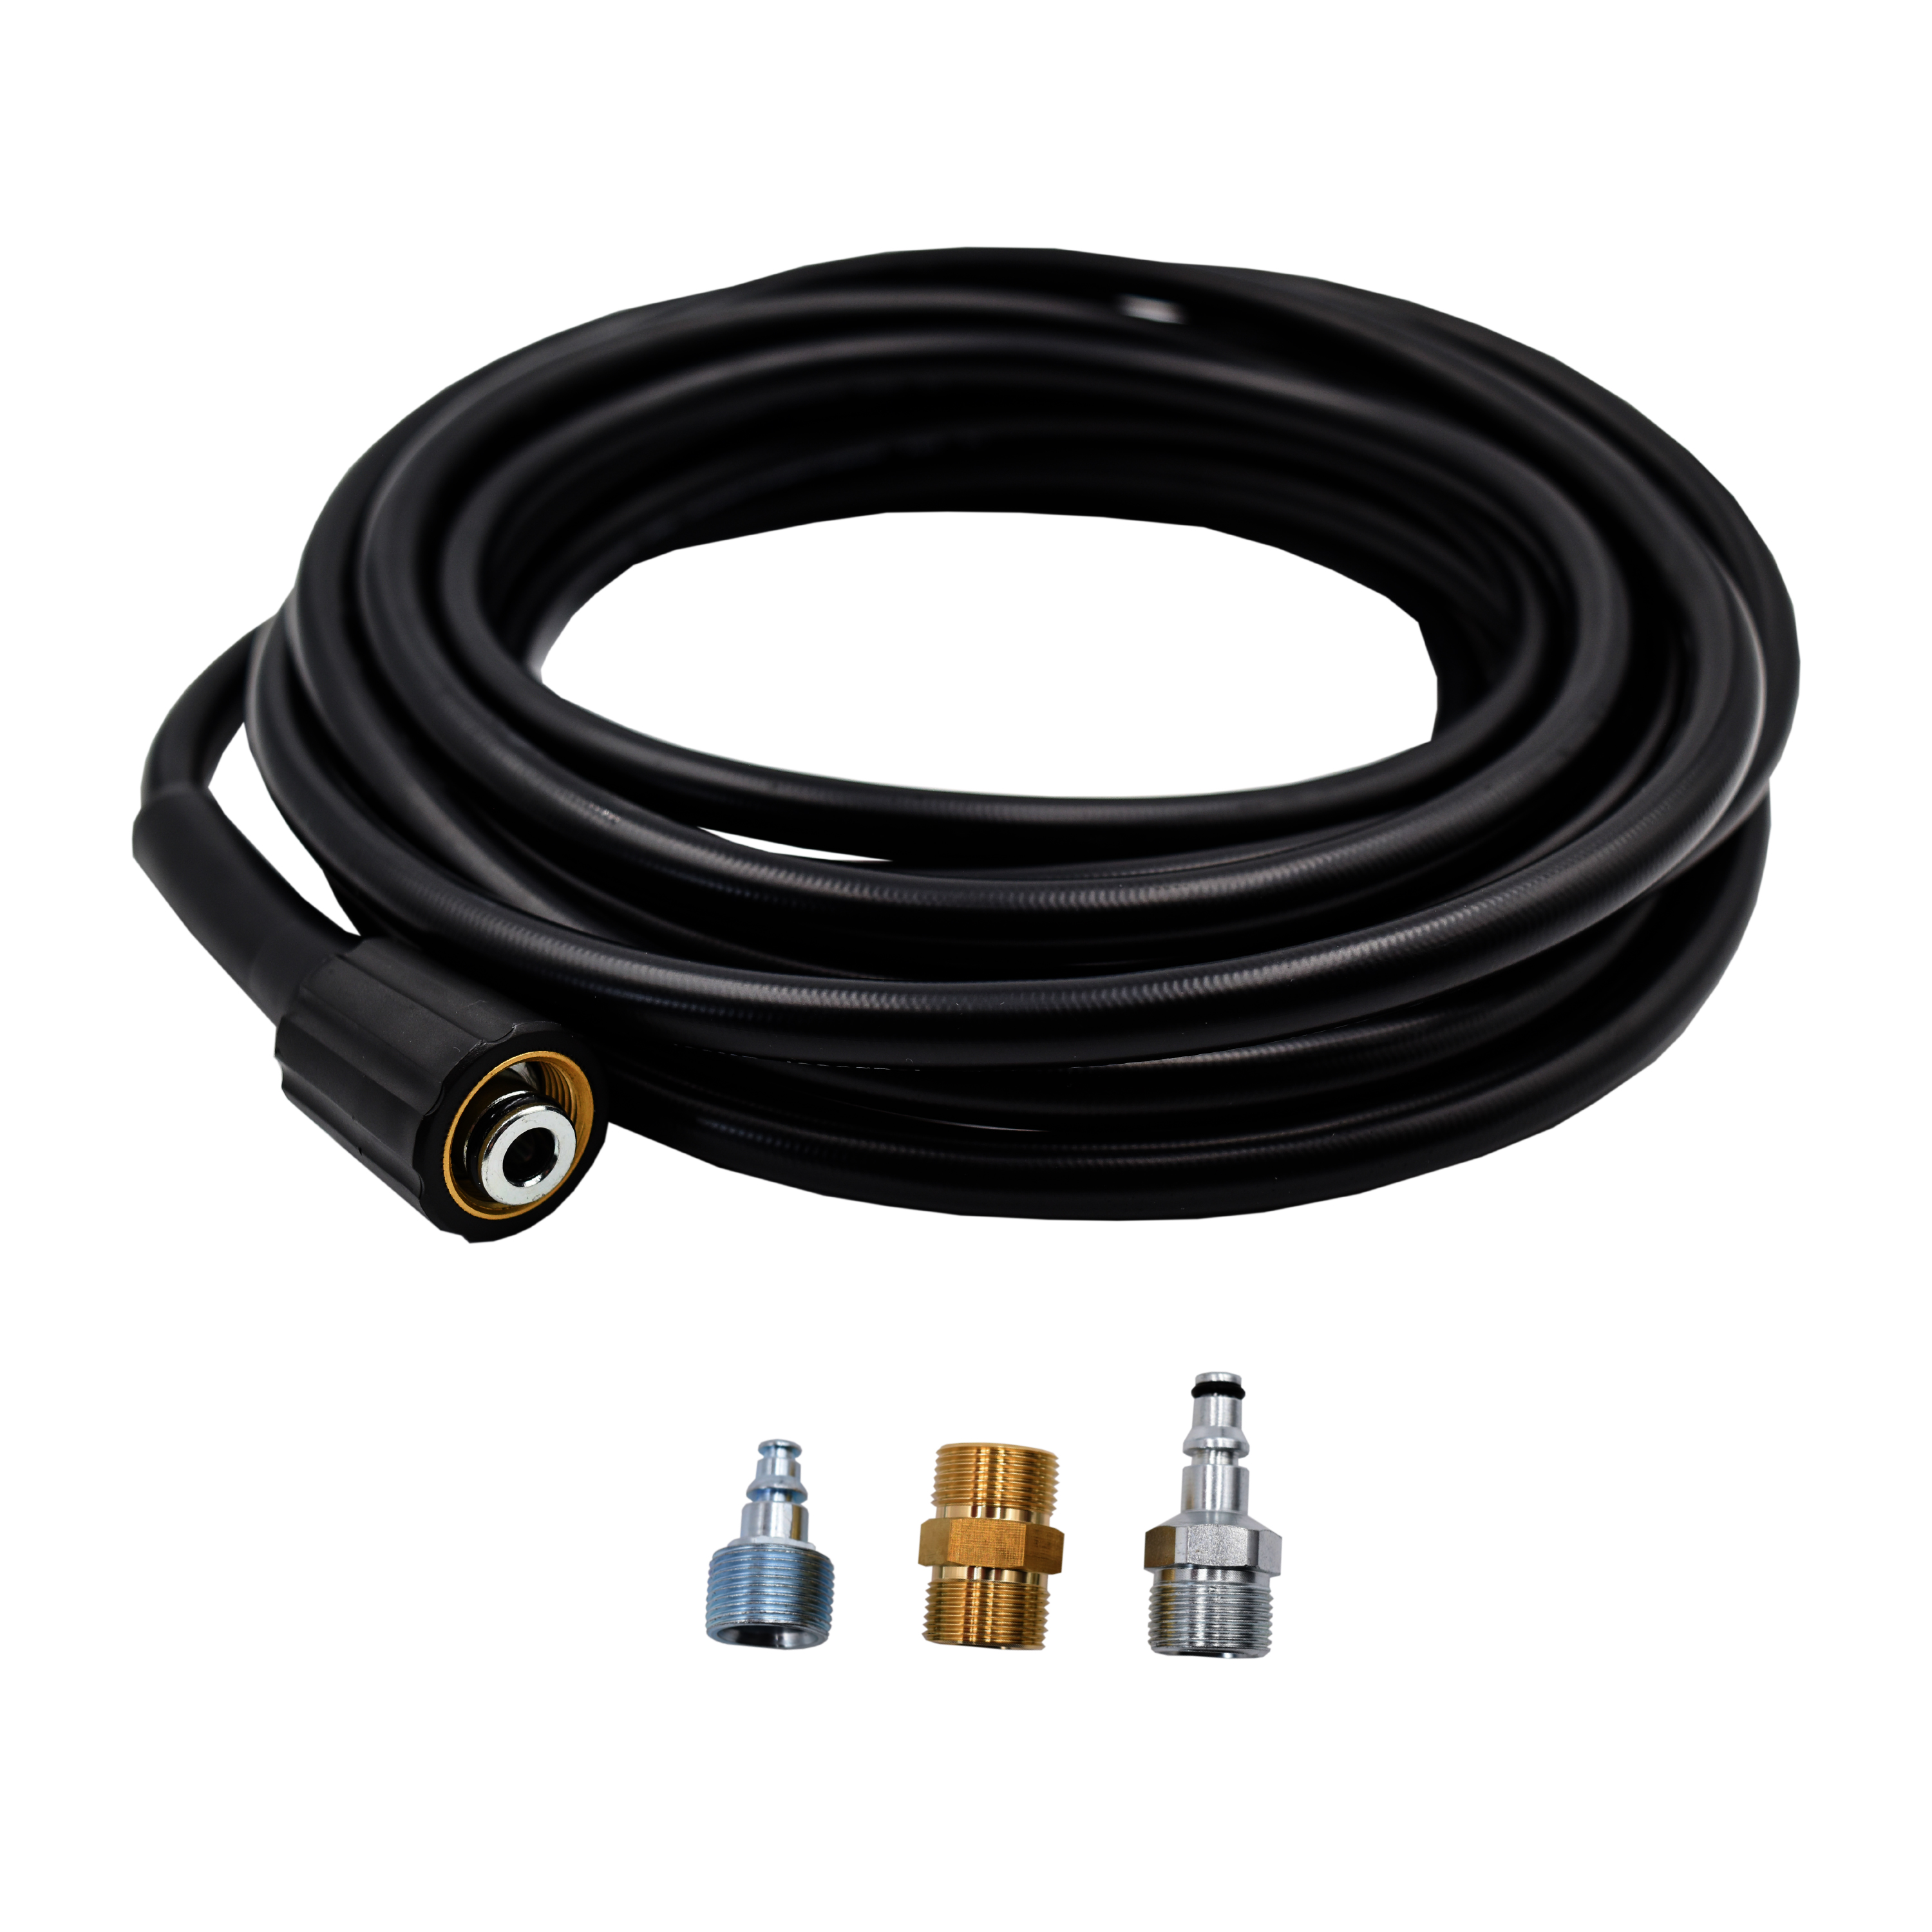 AR Blue Clean PW909UH-R, 25' Super Soft Pressure Washer hose (1/4"x 25' Replacement/Extension) Questions & Answers